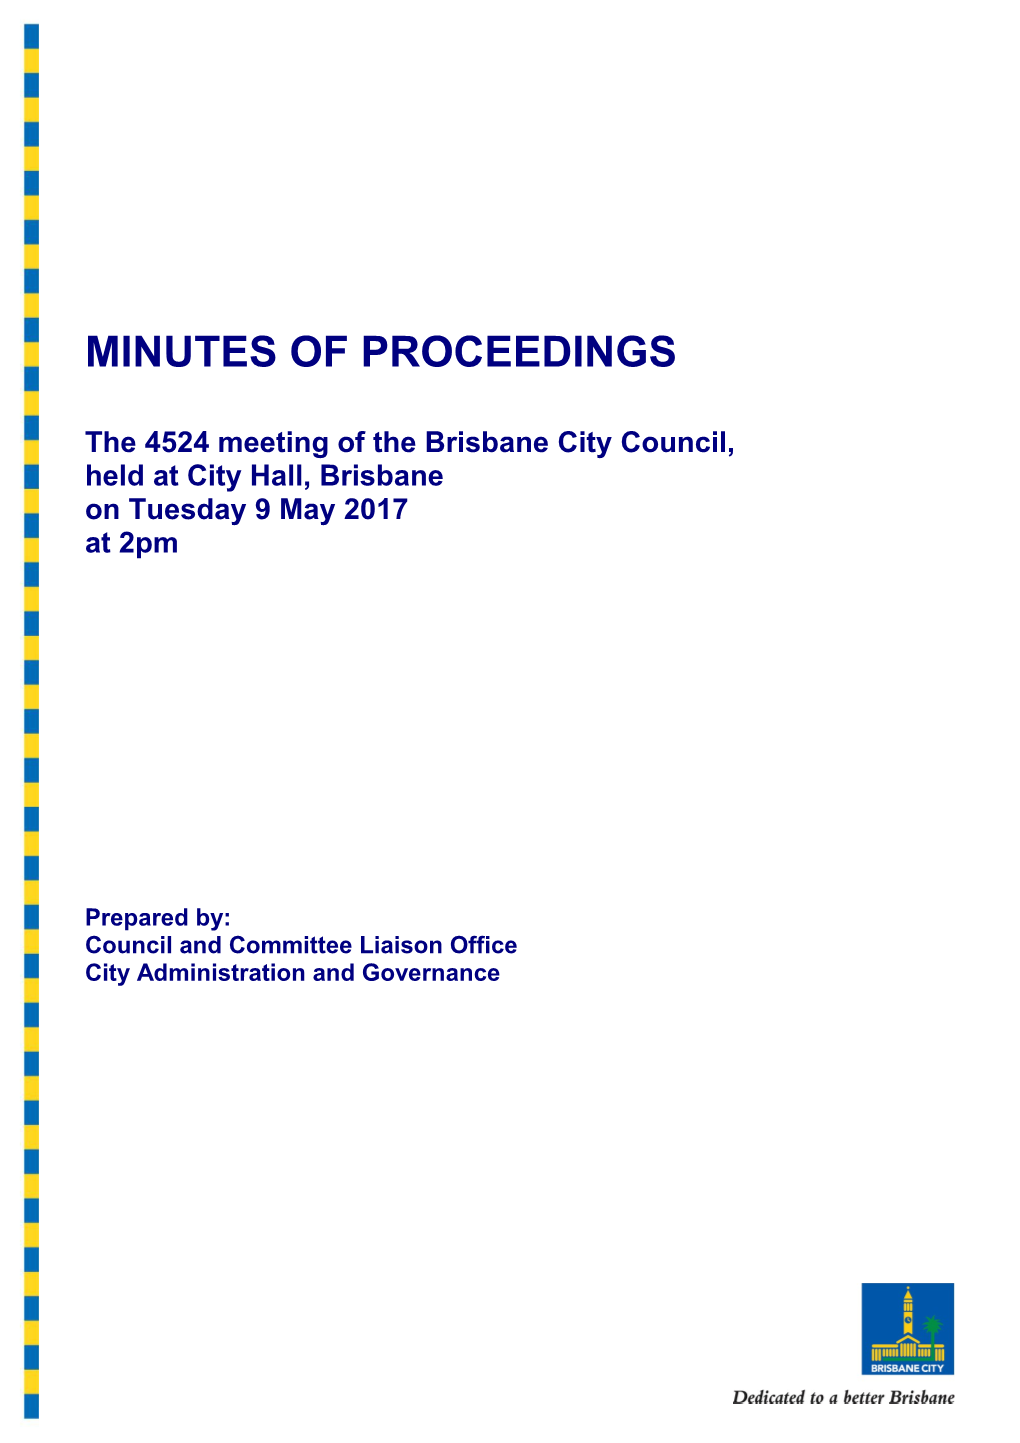 The 4524 Meeting of the Brisbane City Council